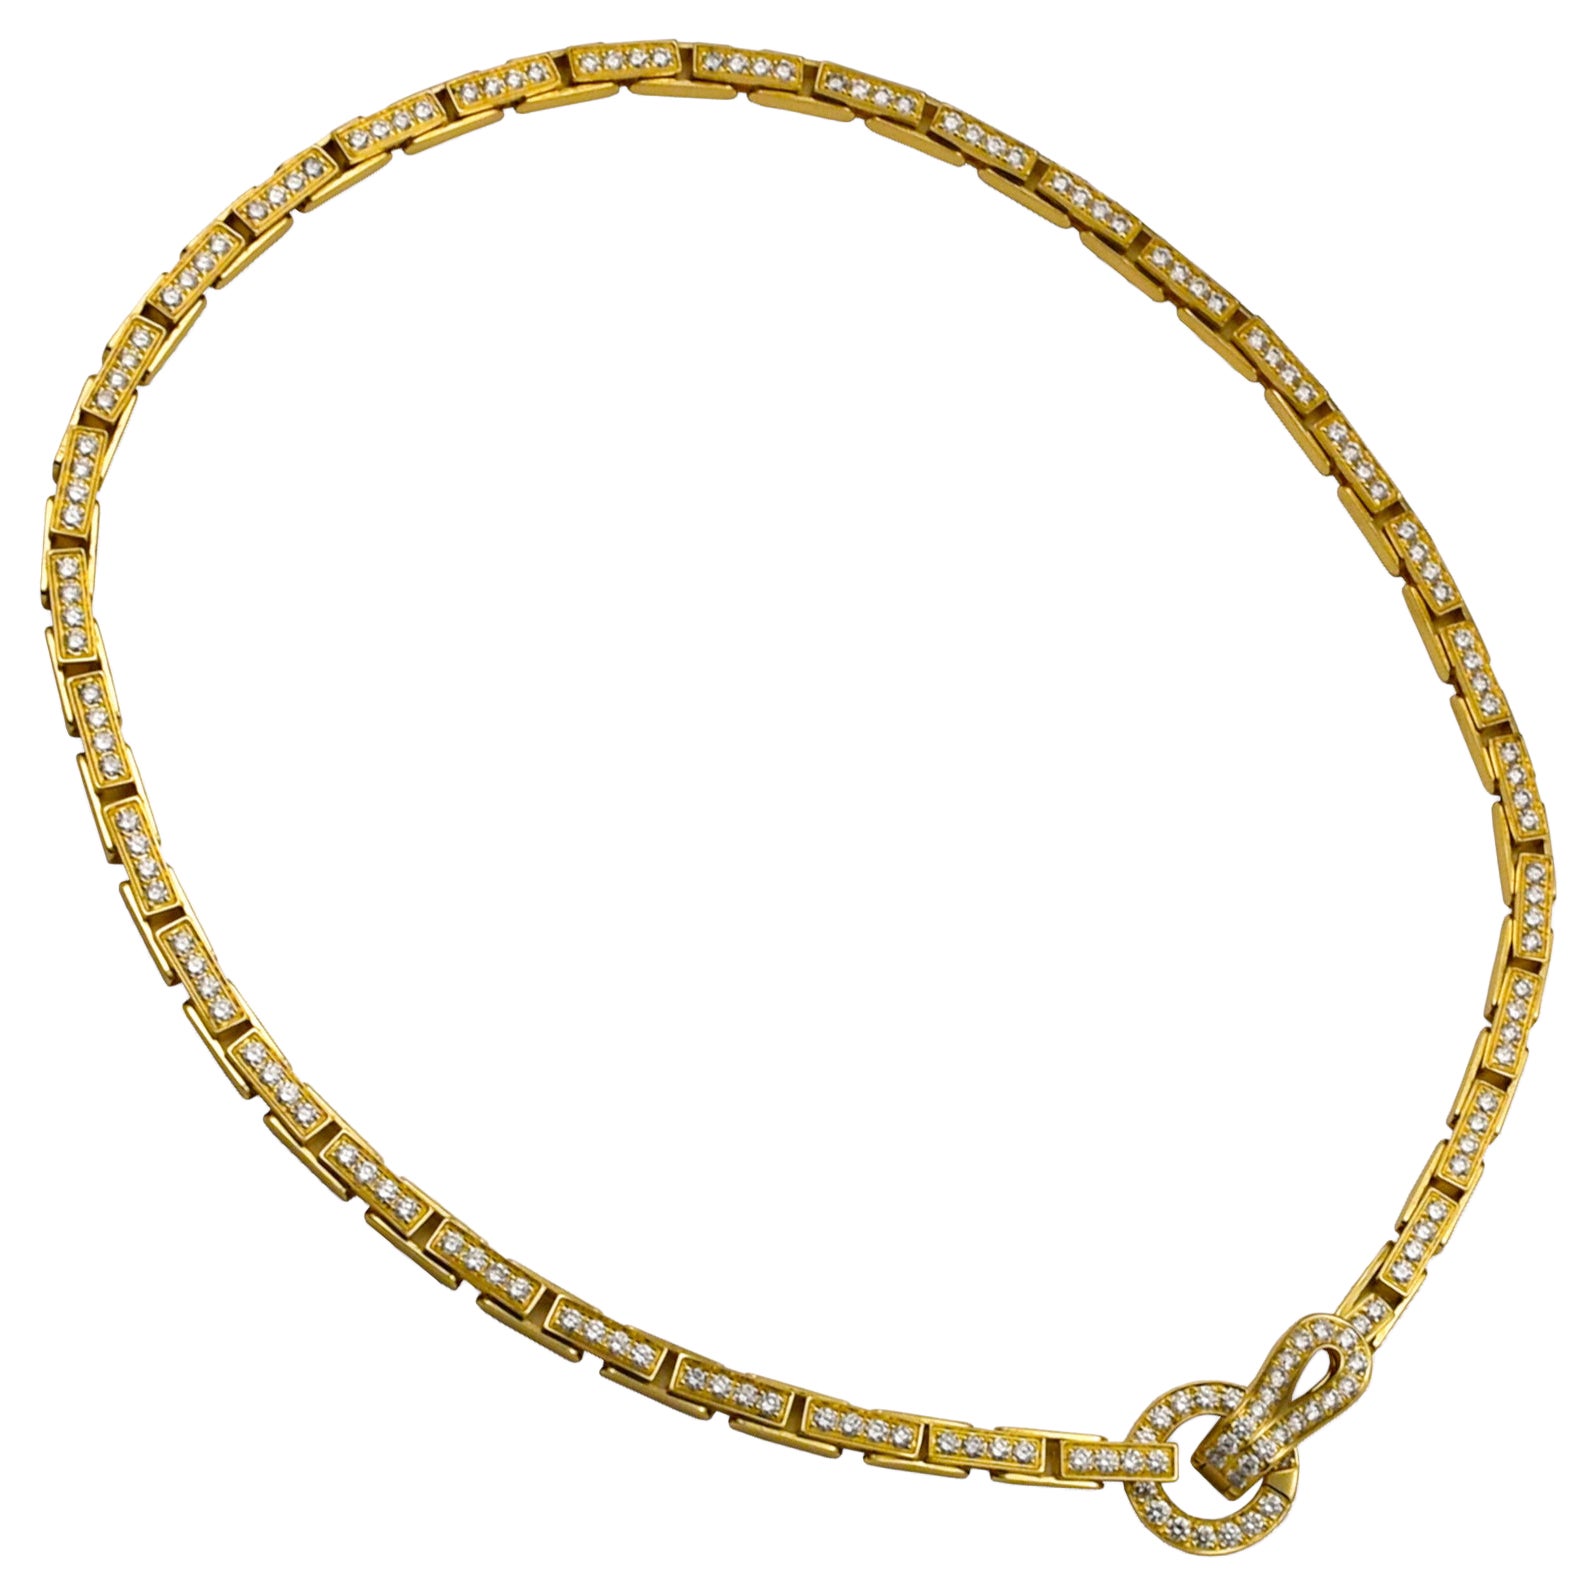 Cartier Agrafe de Cartier Pave Necklace in 18K Yellow Gold